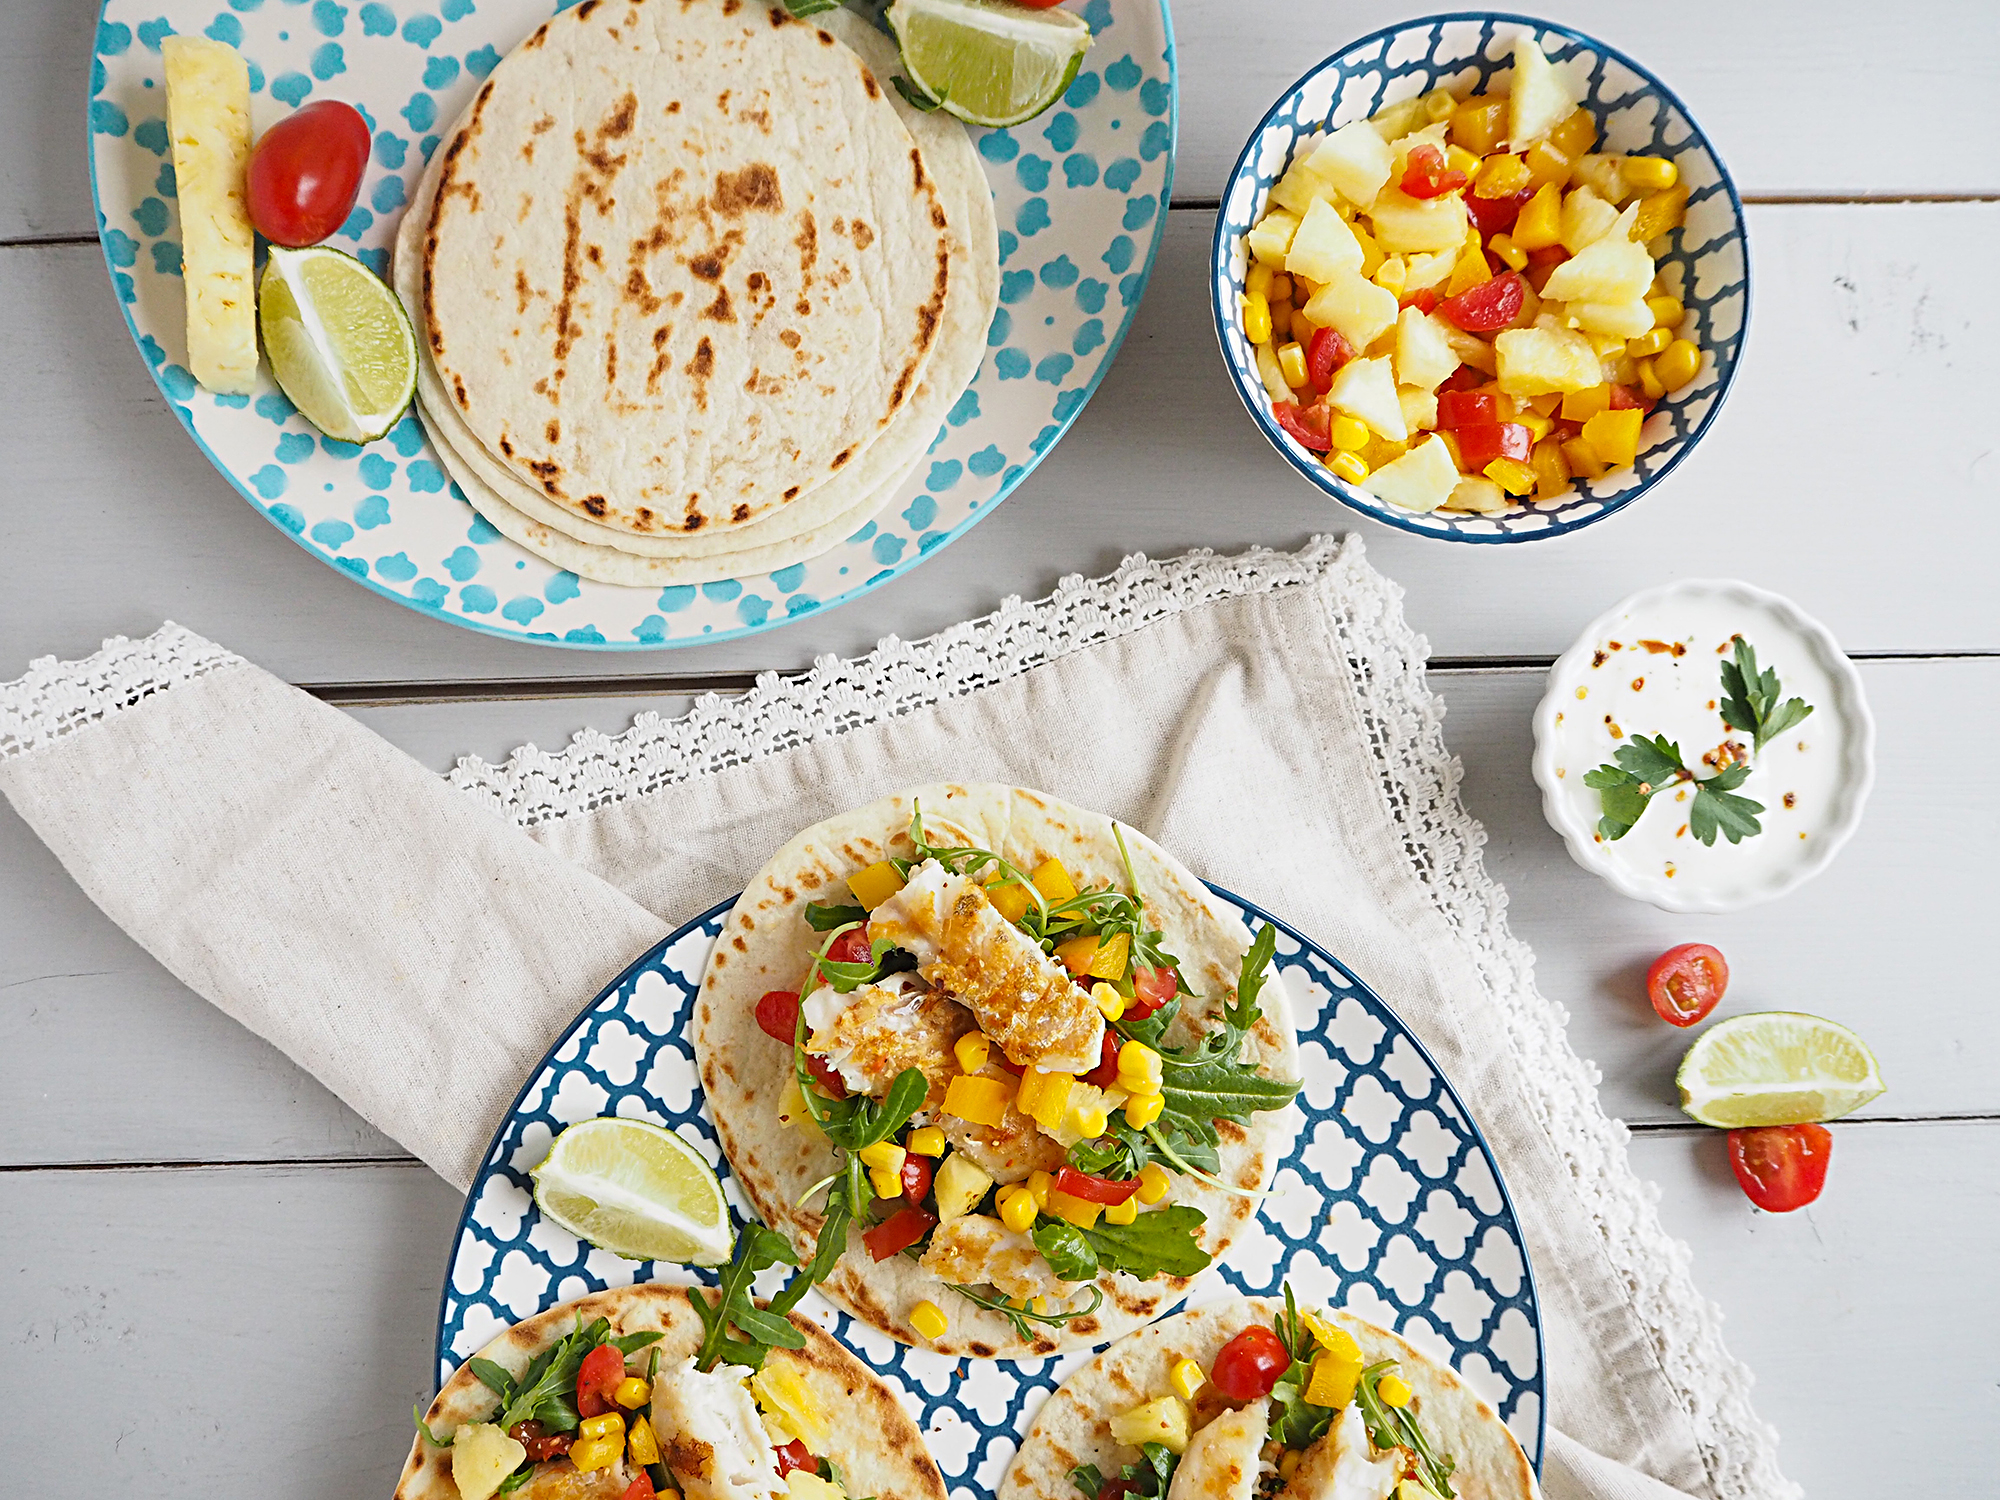 A blue and white patterned plate sits on a white napkin. On the plate are 3 open fish tacos with pineapple salsa. Above this is a bowl of pineapple salsa and a plate containing more tortillas.